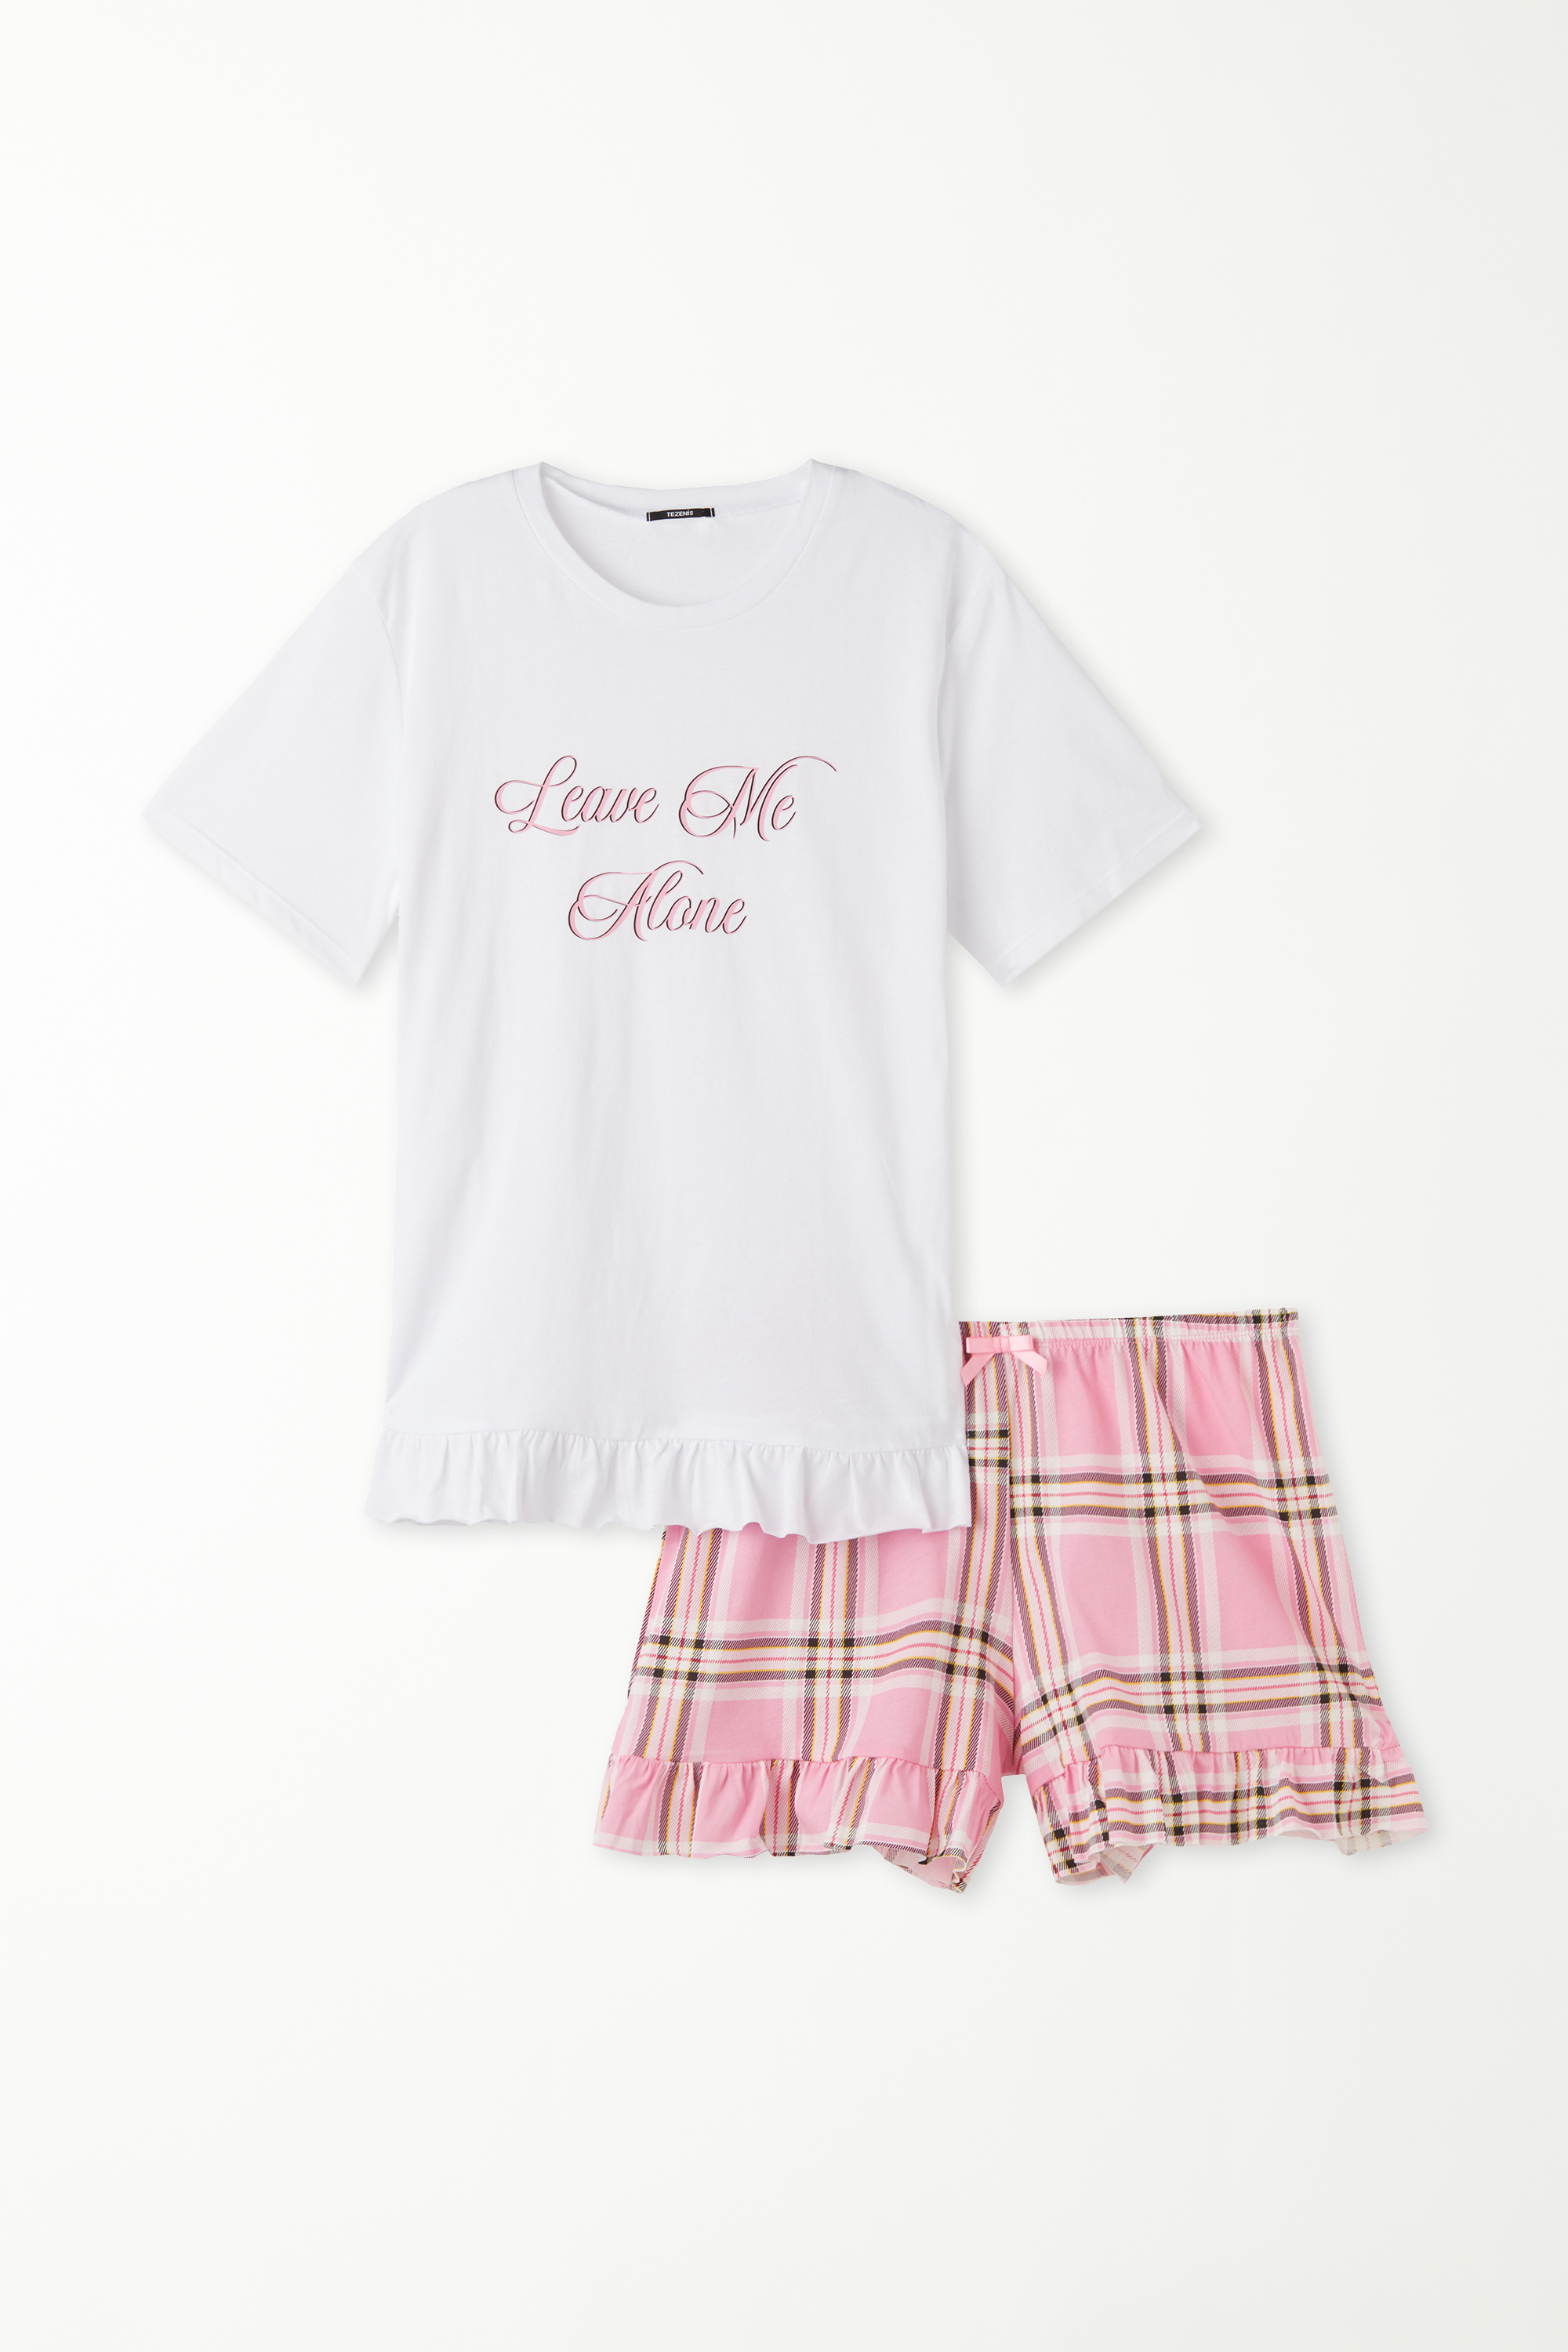 Short-Sleeved Short Cotton Pajamas with “Leave Me Alone” Print